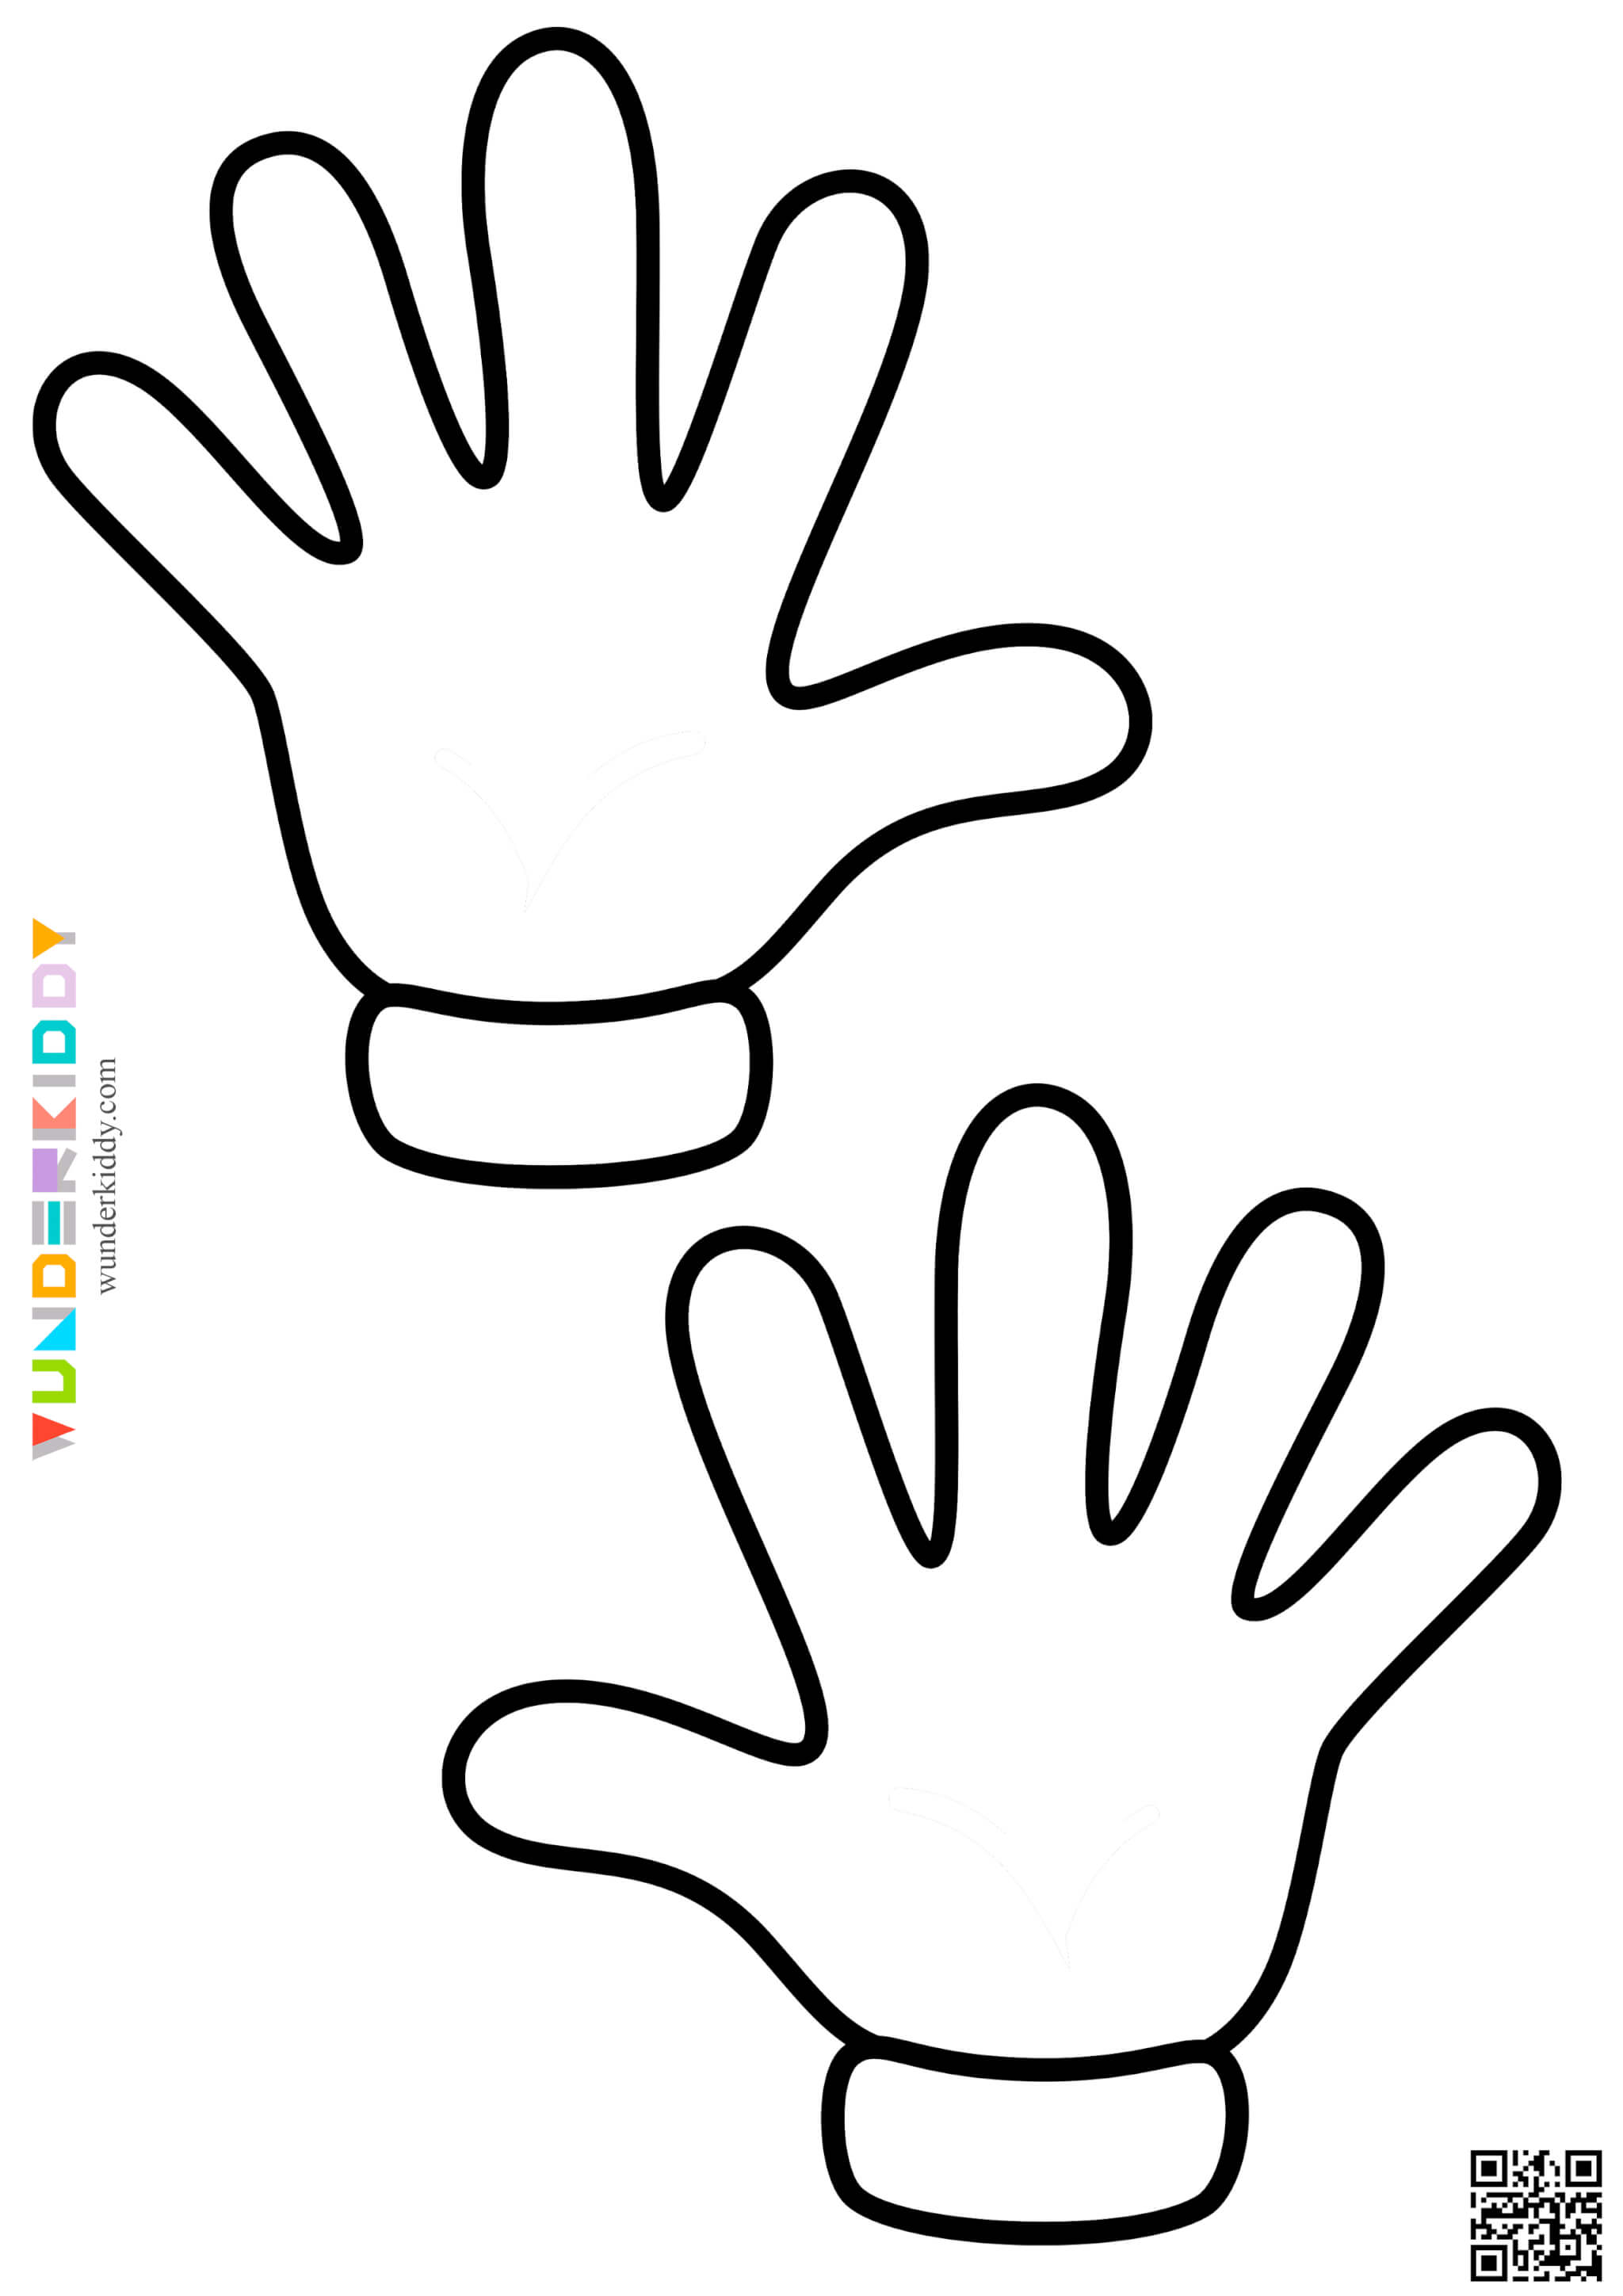 Printable Hands Template - Image 5